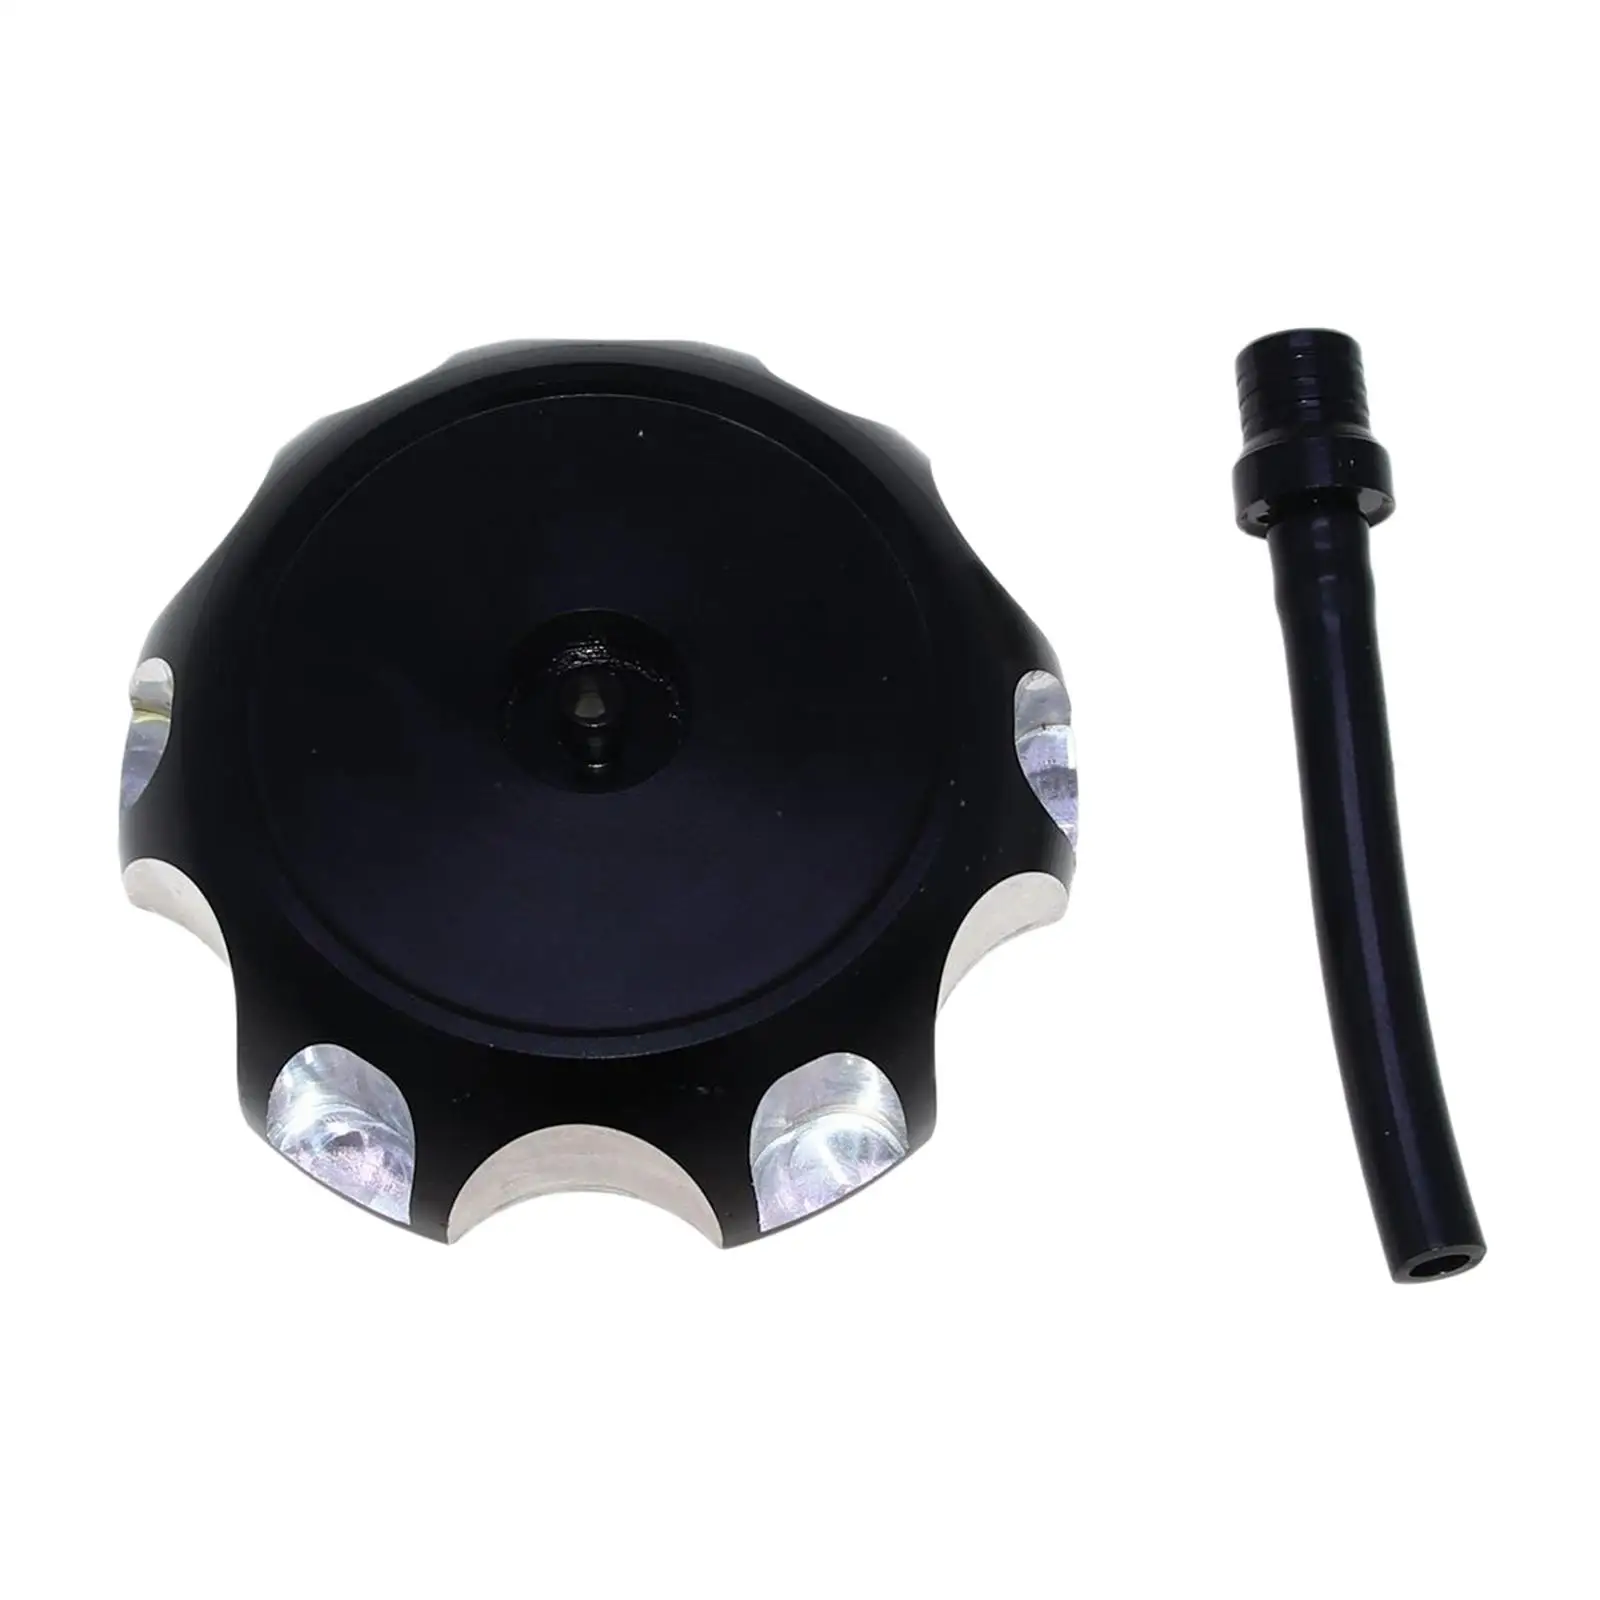 Direct Bike Thread Gas Tank Cap with Breather Vent Hose CNC Ergonomically Designed with Finger Grooves Fuel Tank Cap